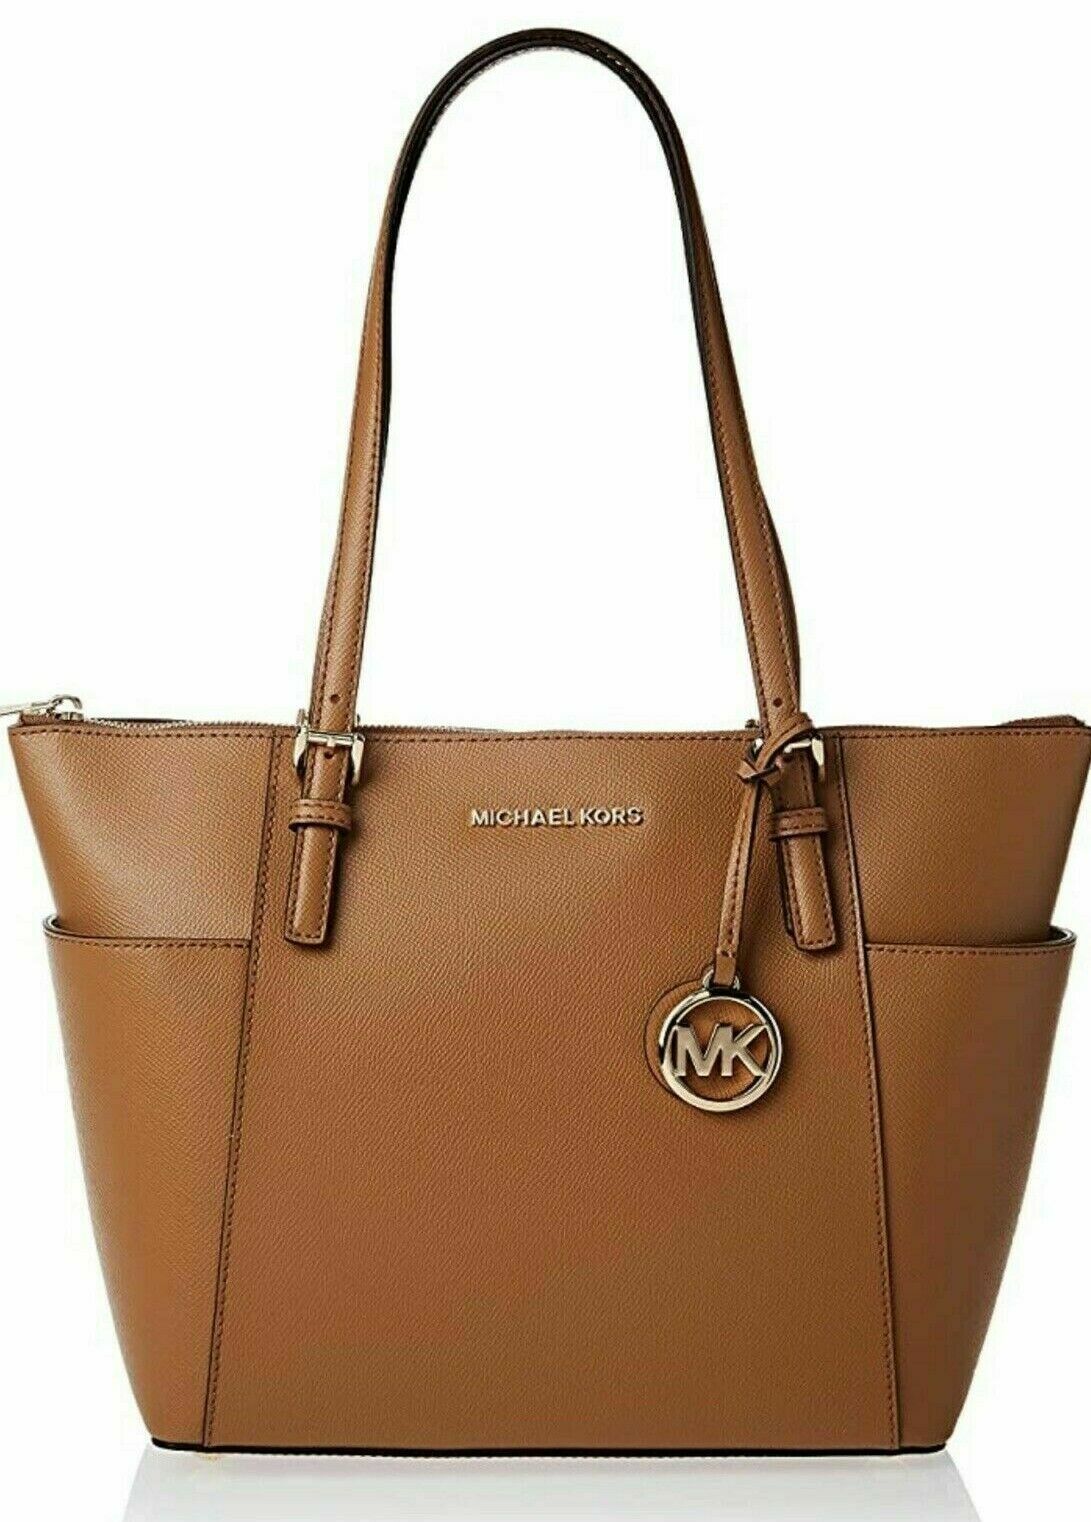 New Michael Kors Charlotte Large Top Zip Tote Saffiano Leather Luggage